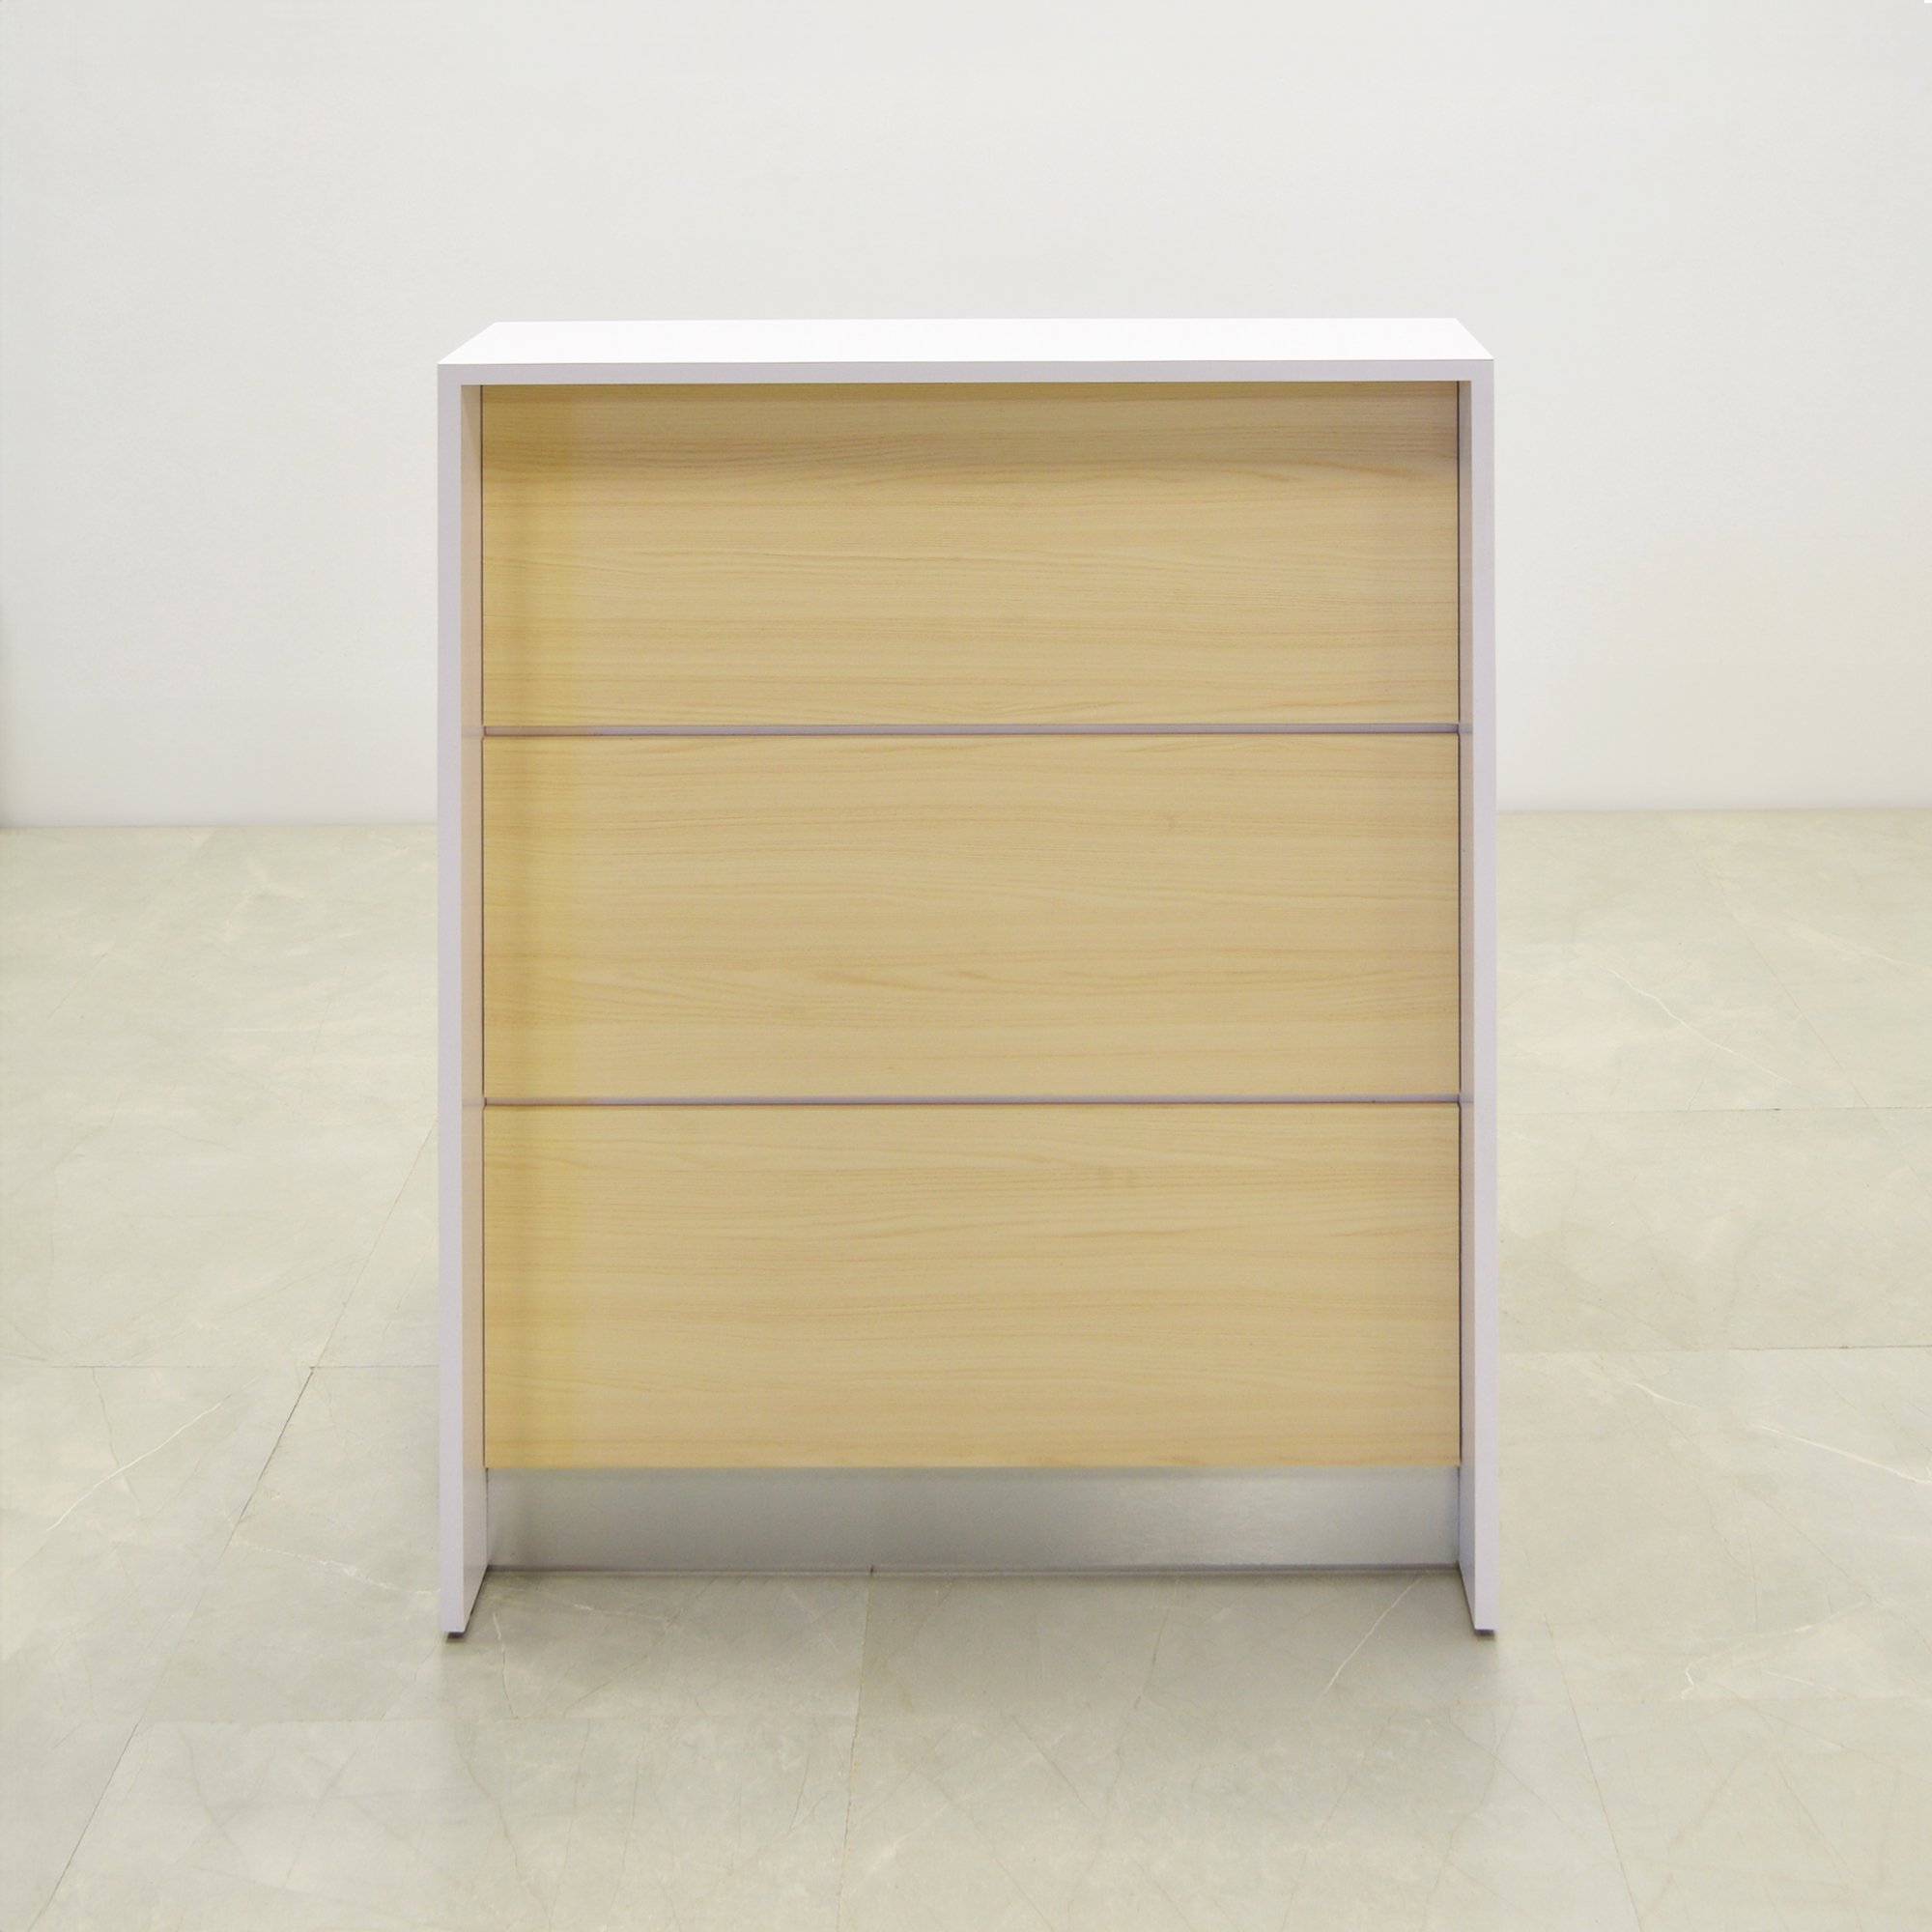 36-inch New Jersey Podium & Host Reception Desk in white gloss laminate desk, natural ash matte laminate front accent panel, and brushed stainless steel toe-kick shown here.